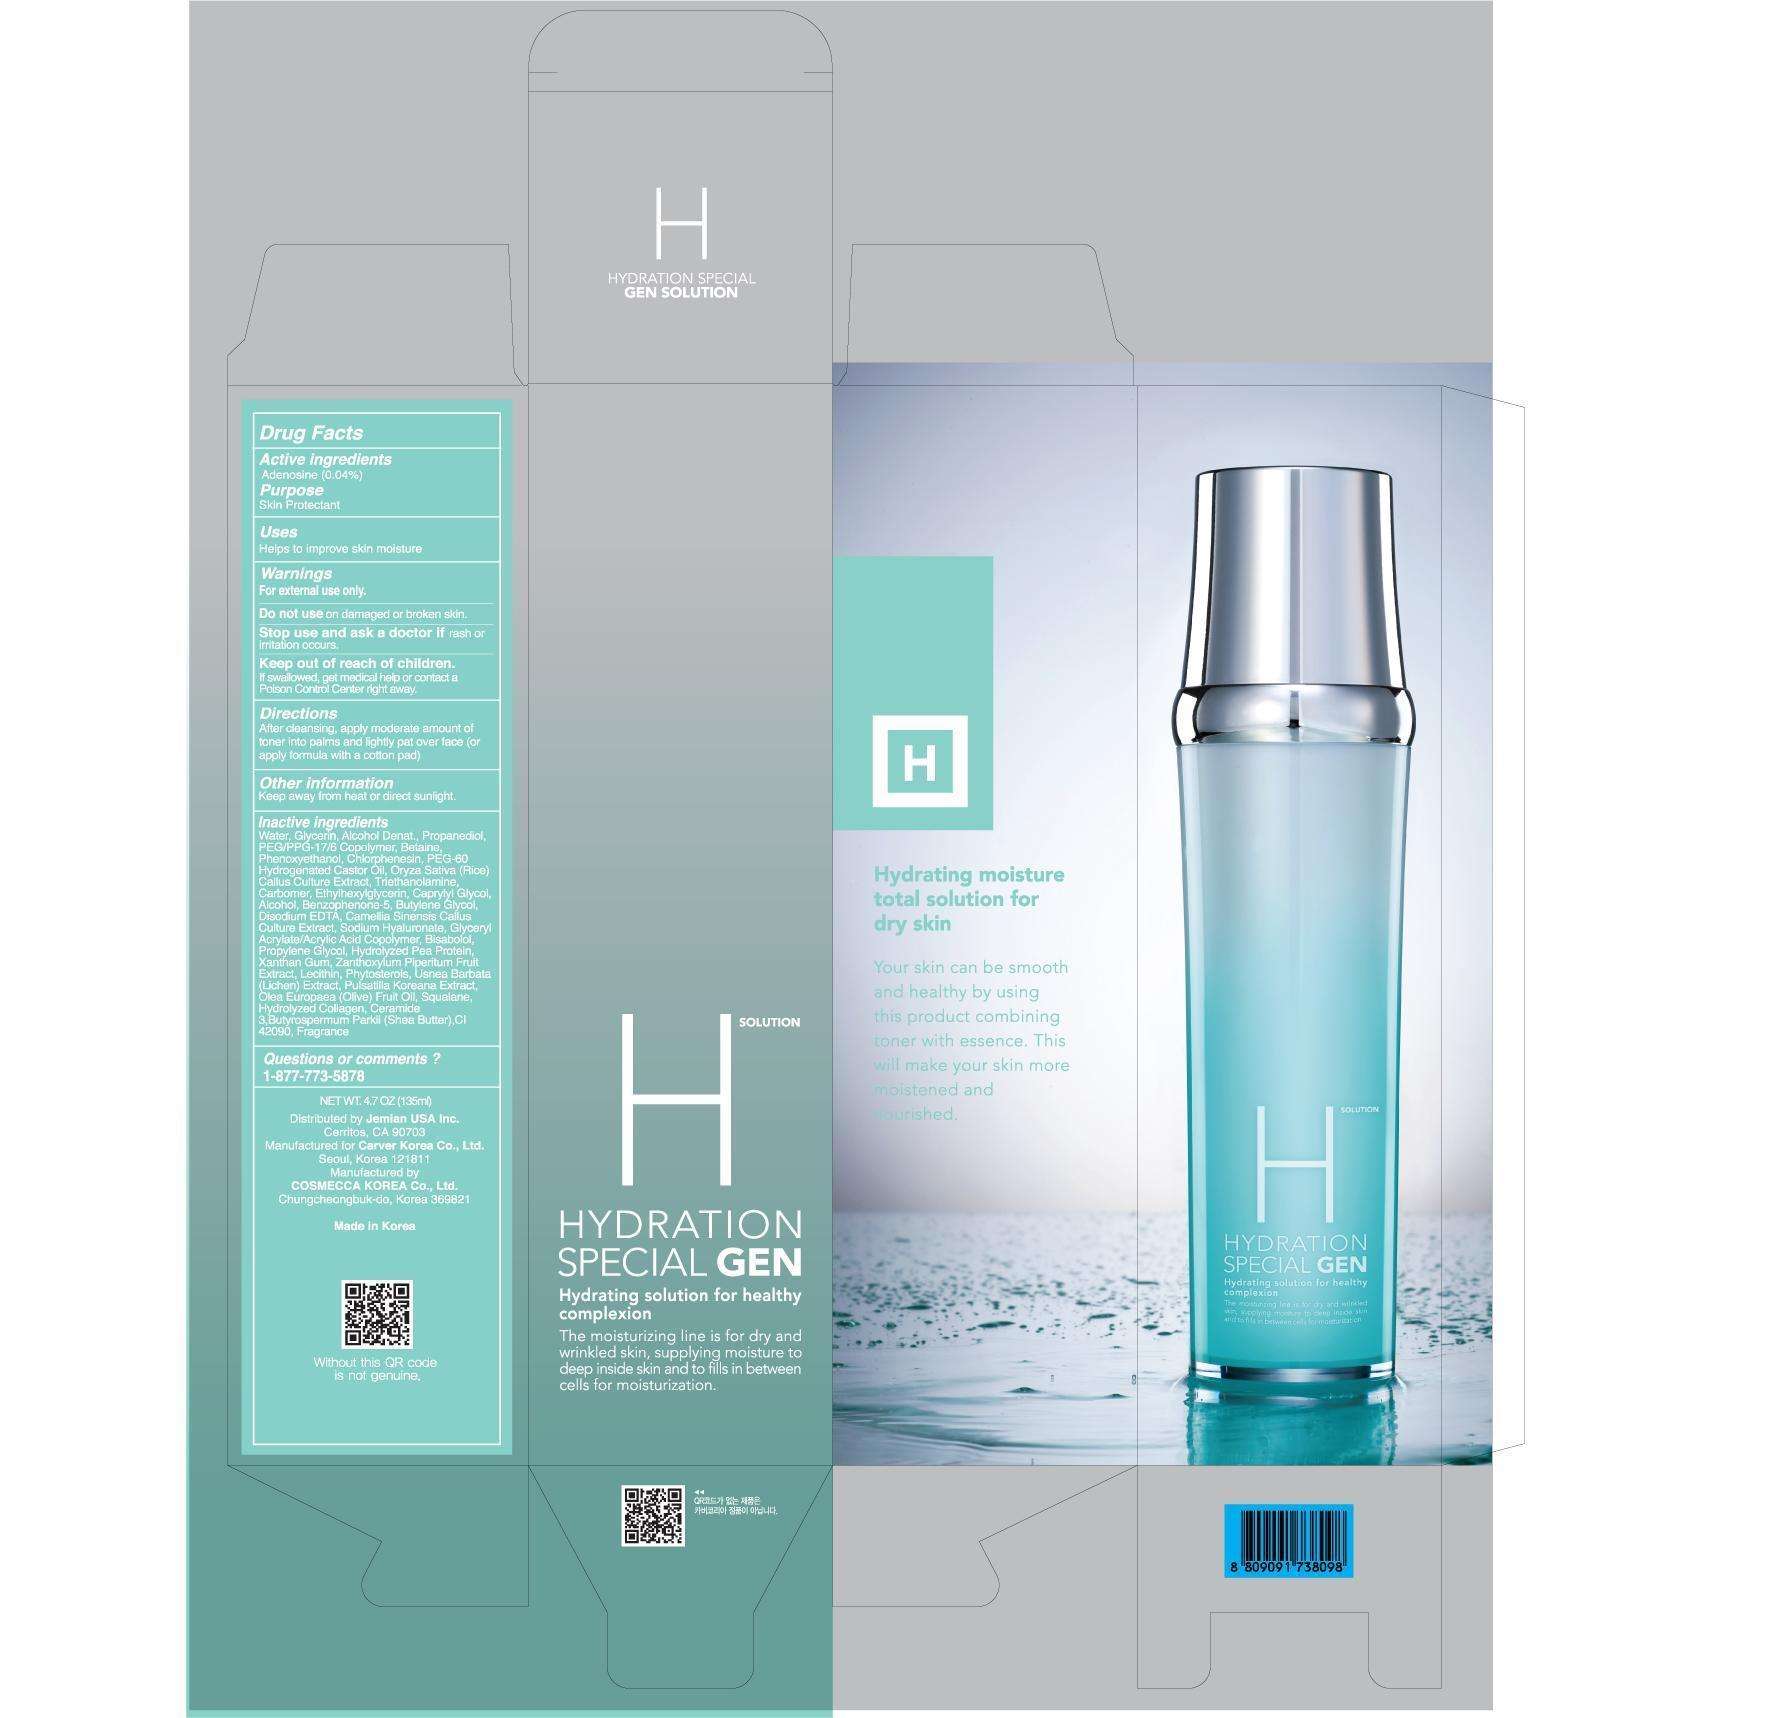 AHC Hydration Special Gen Solution